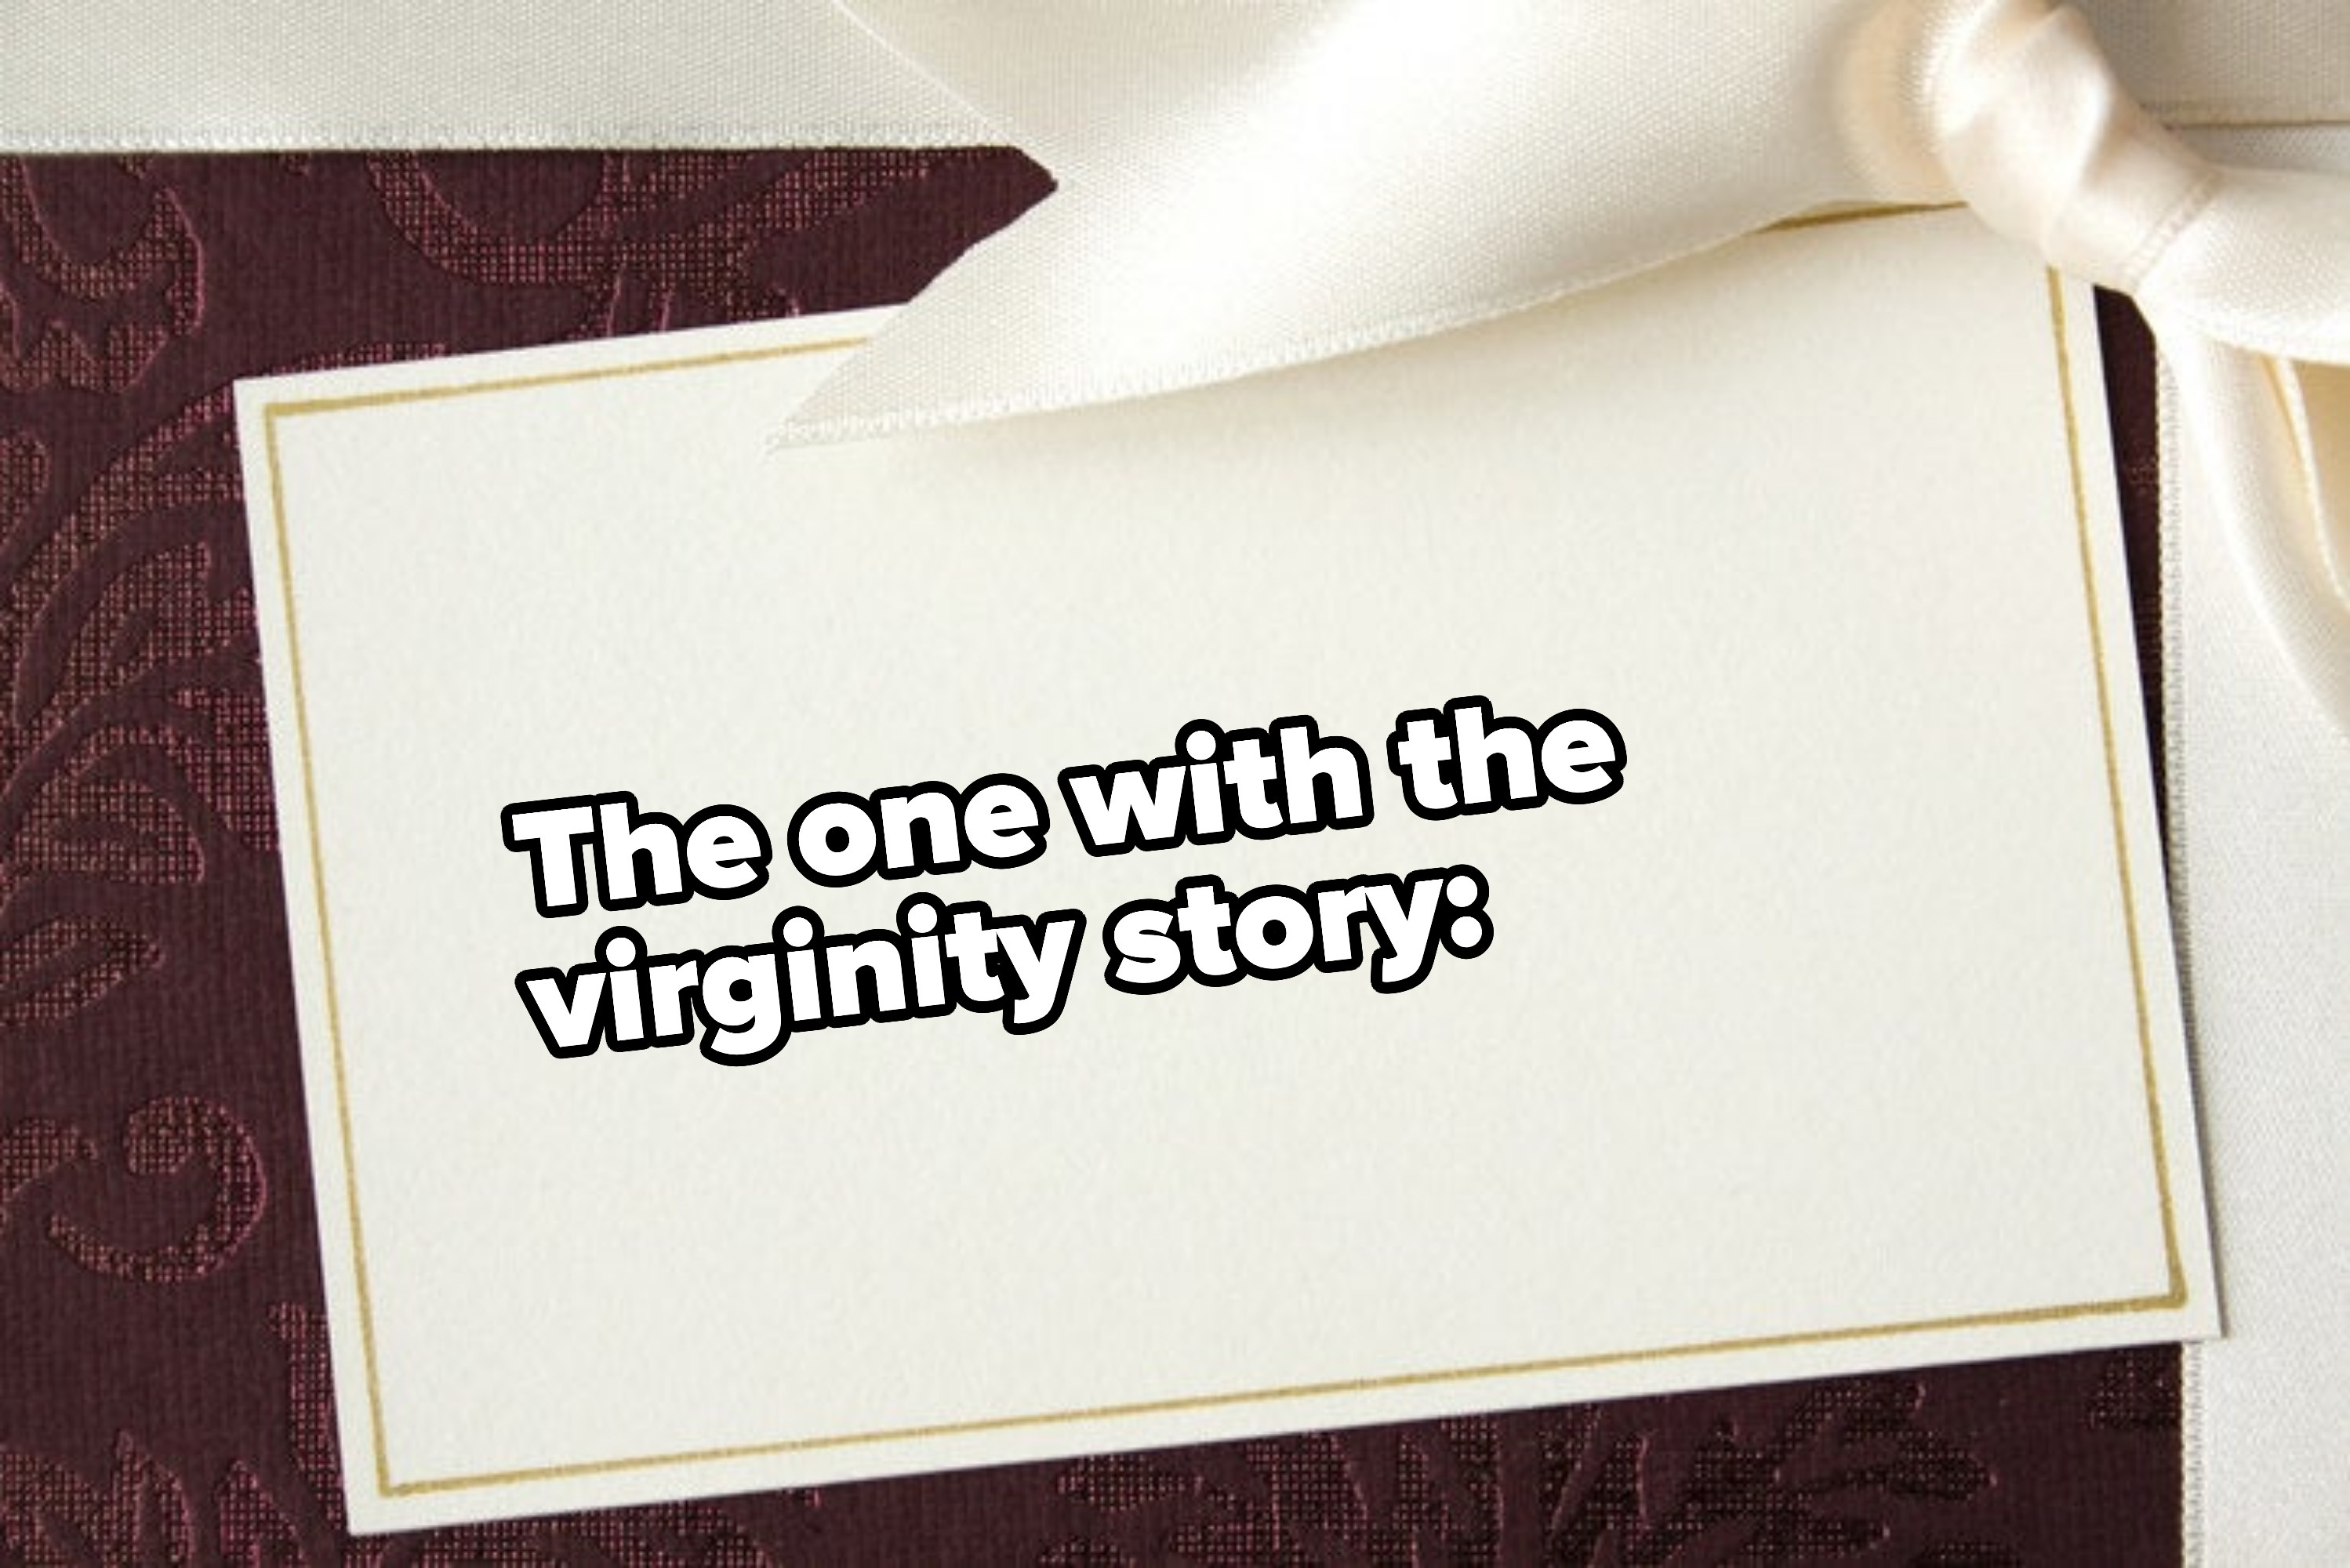 &quot;The one with the virginity story&quot;